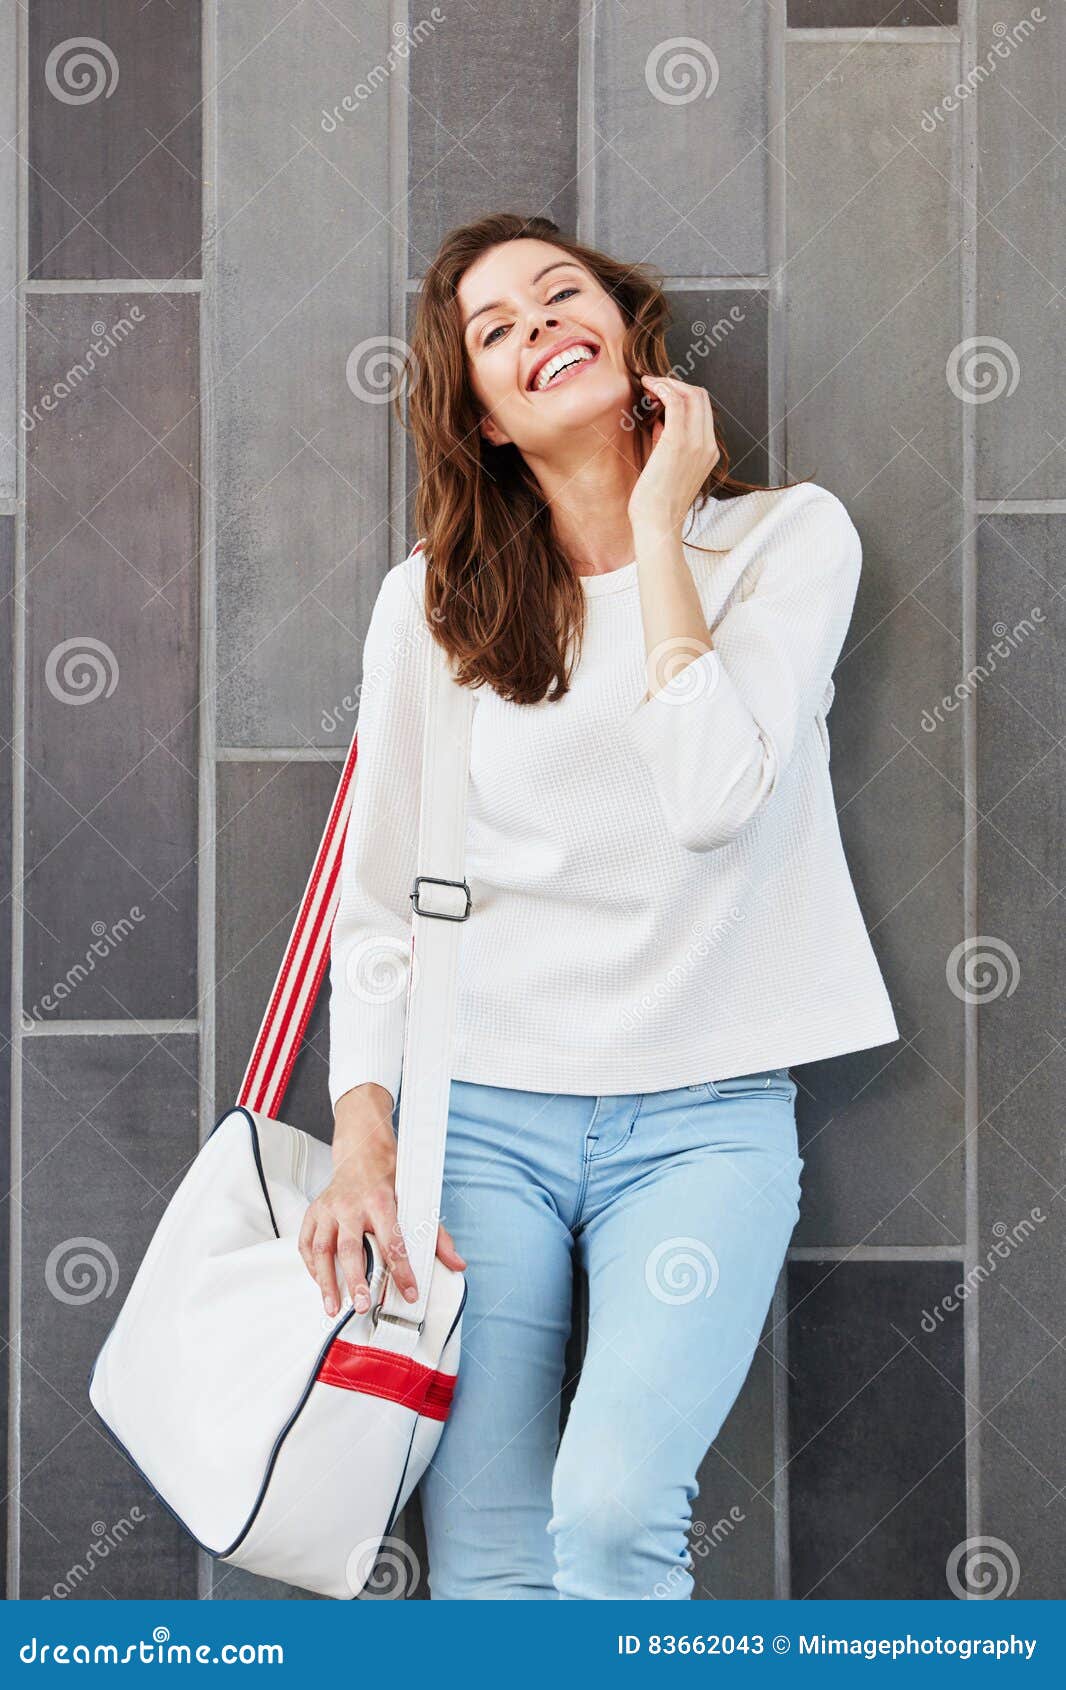 Stylish Young Woman Posing Against a Wall with Bag Stock Image - Image ...